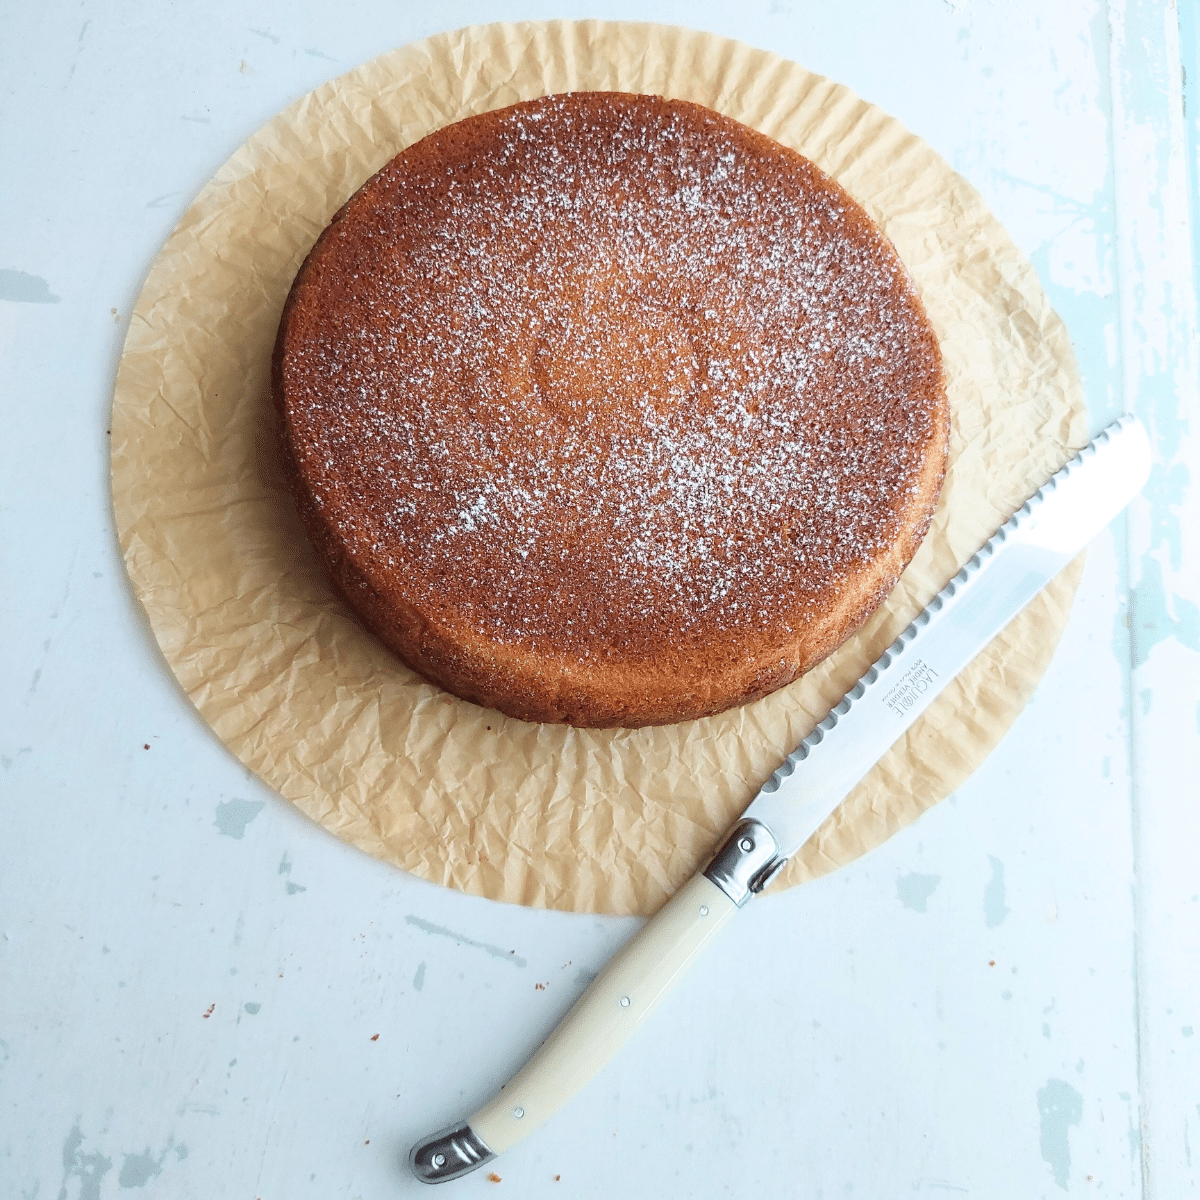 Olive oil cake baked and cooling